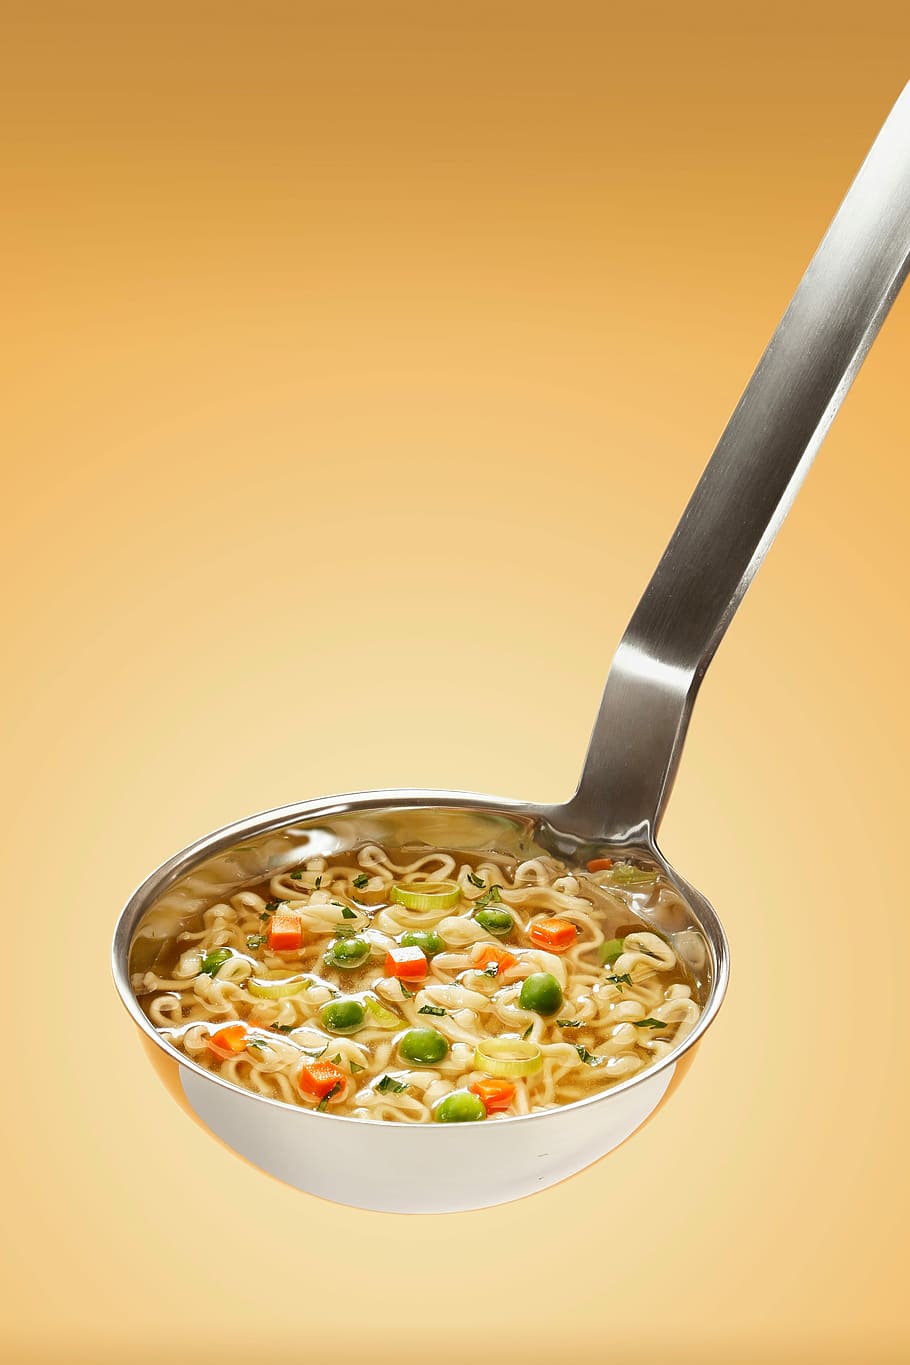 stainless, steel saddle, noodle soup, stainless steel, Saddle, Noodle, soup, food, spoon, meal